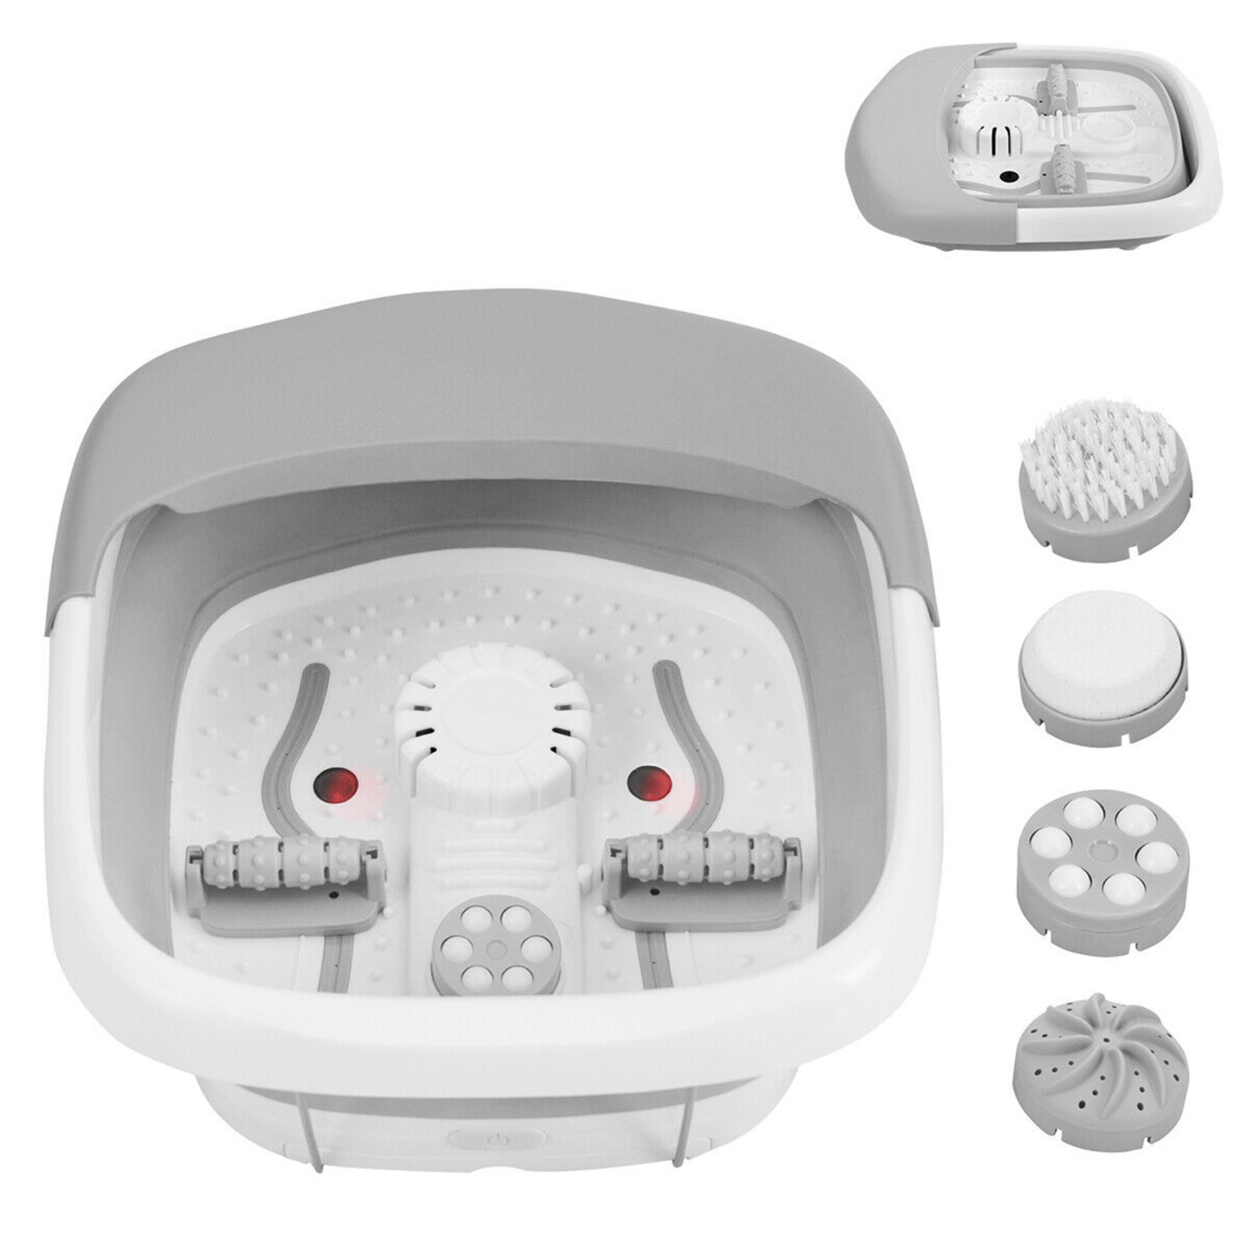 Gymax Foldable Foot Spa Bath Motorized Massager w/ Heat Bubble Red Light Stress Relief Grey